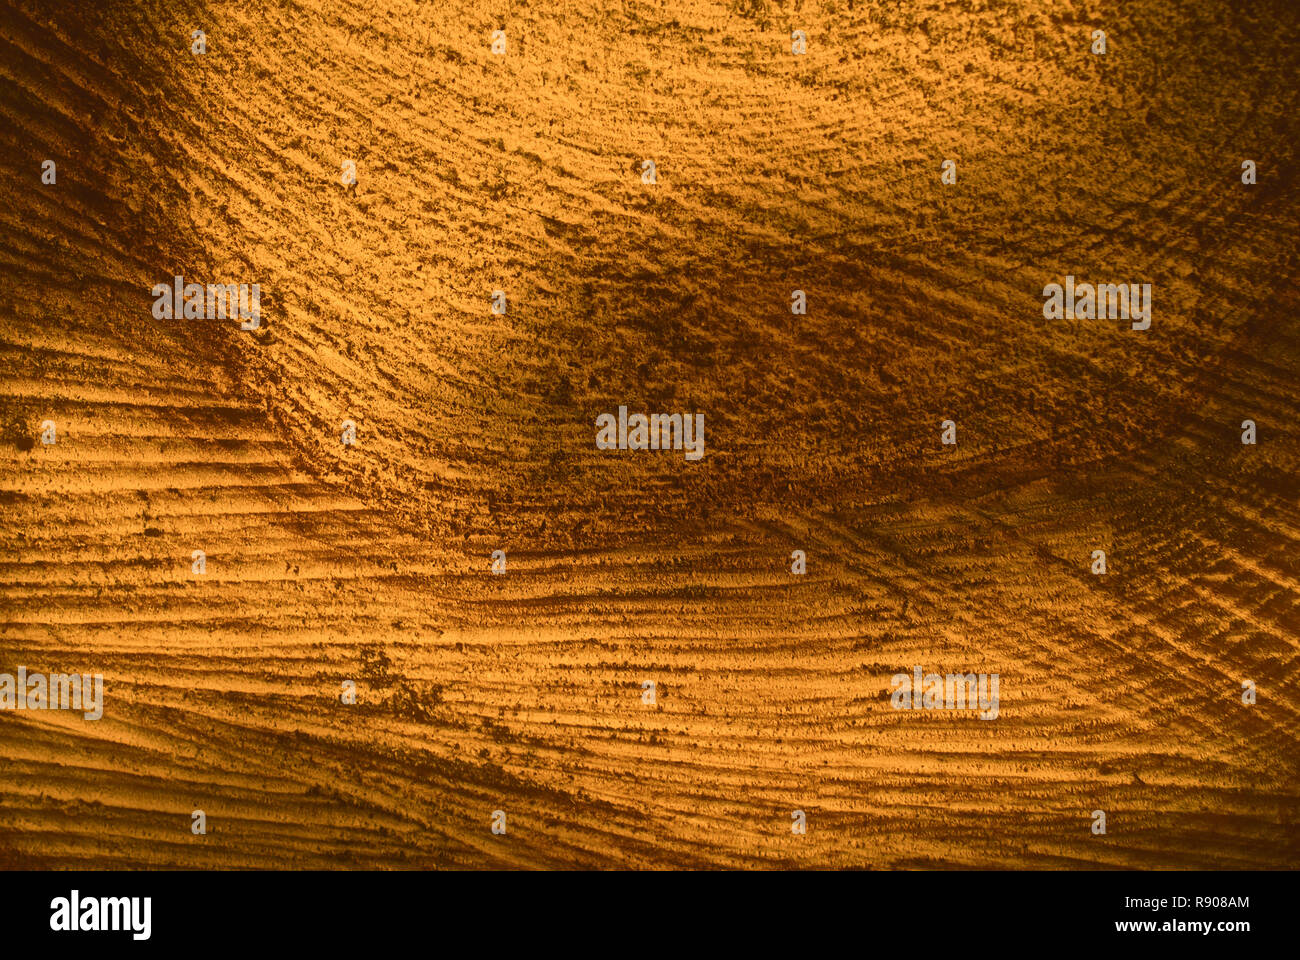 Natural wooden and golden background texture Stock Photo